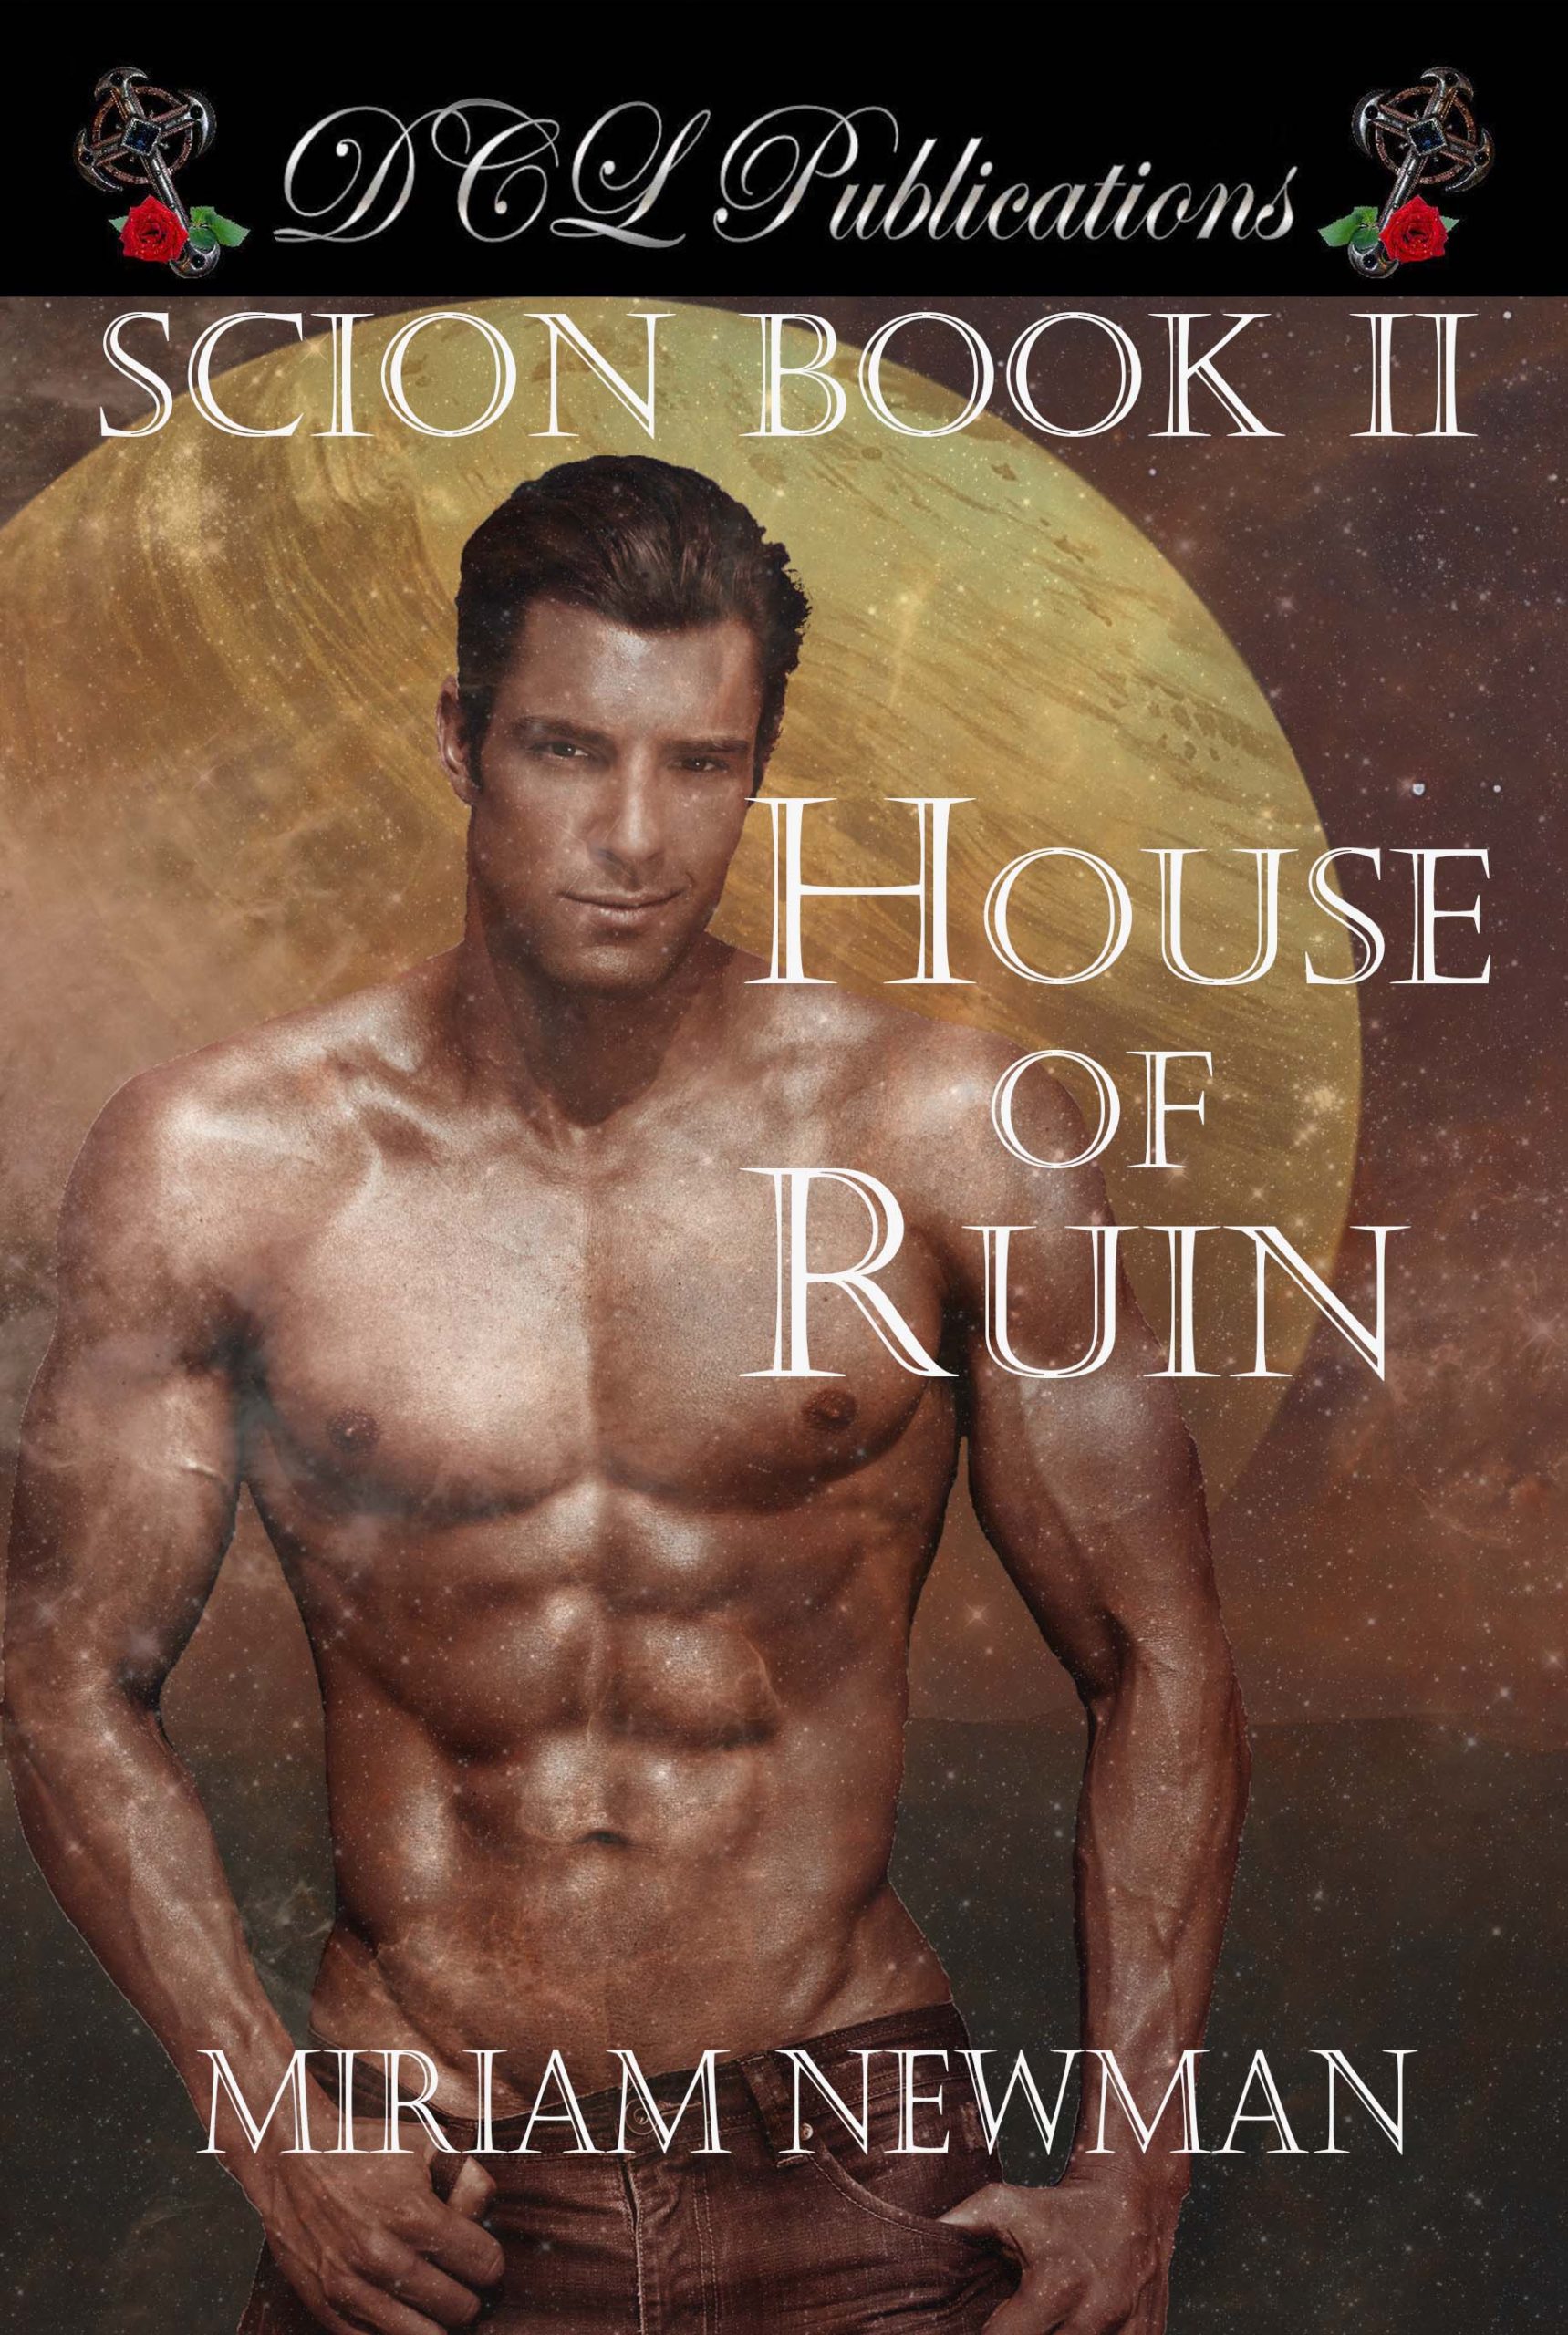 HOUSE OF RUIN by Miriam Newman